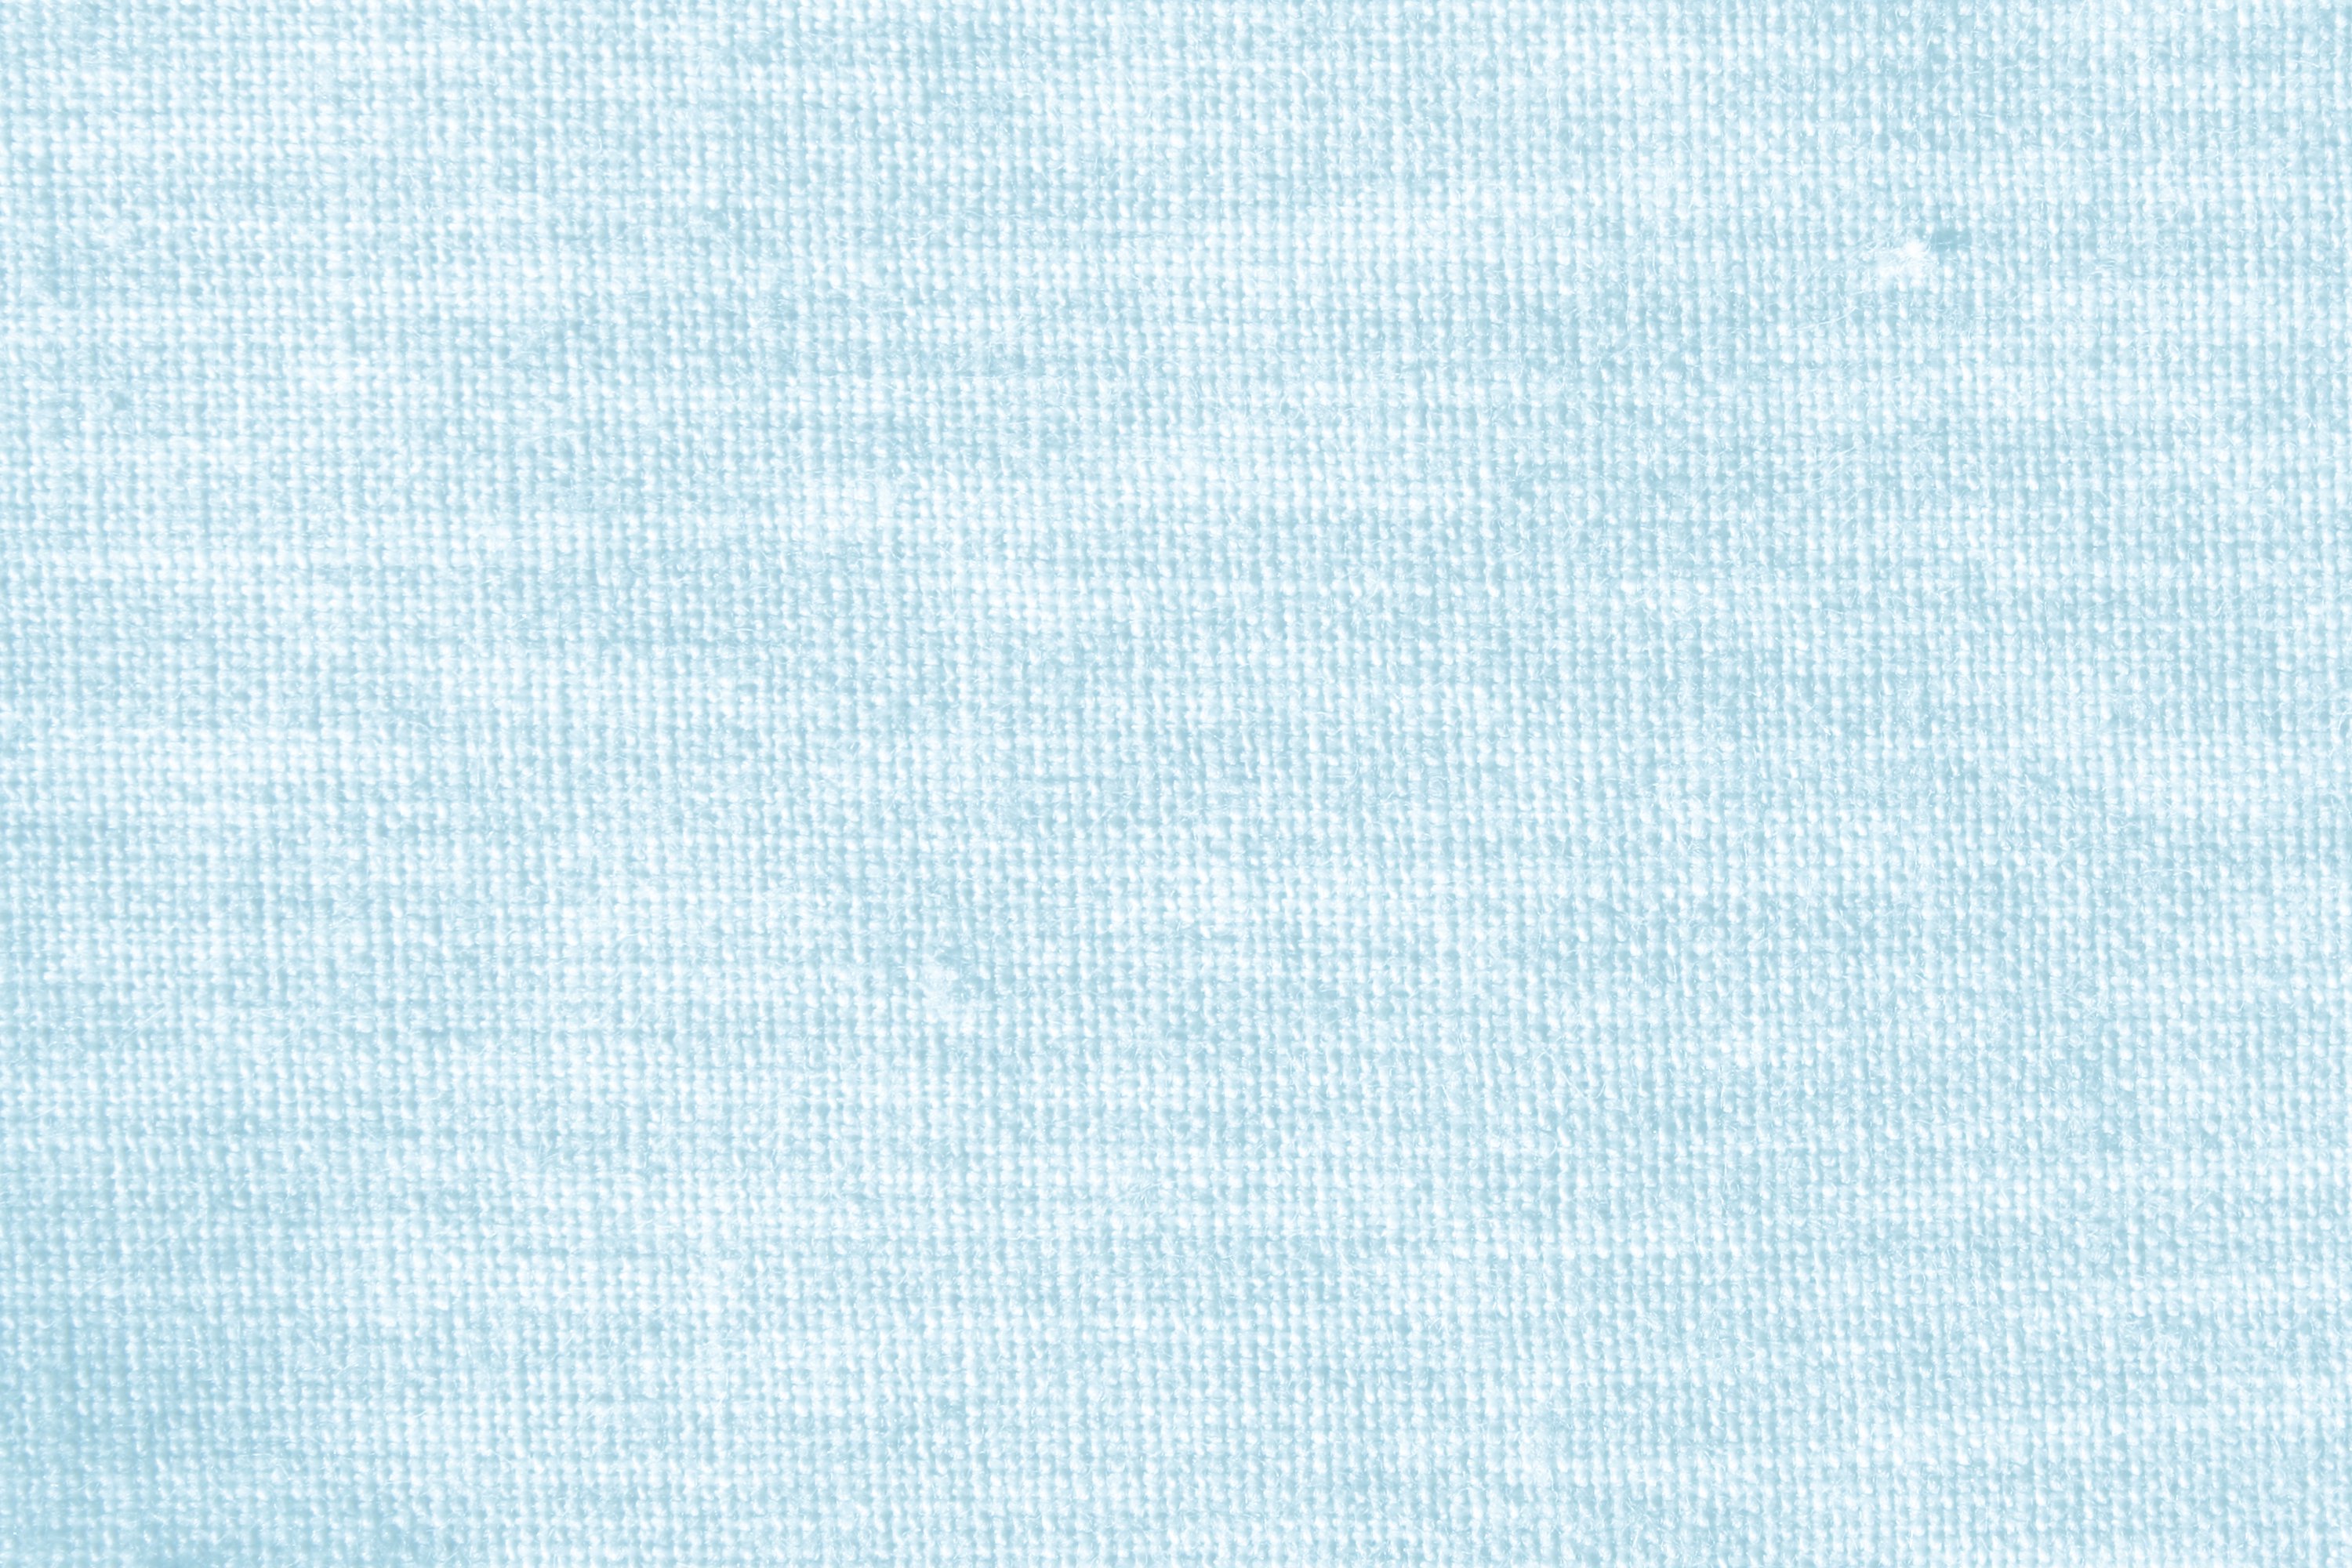 Baby Blue Woven Fabric Close Up Texture High Resolution Photo